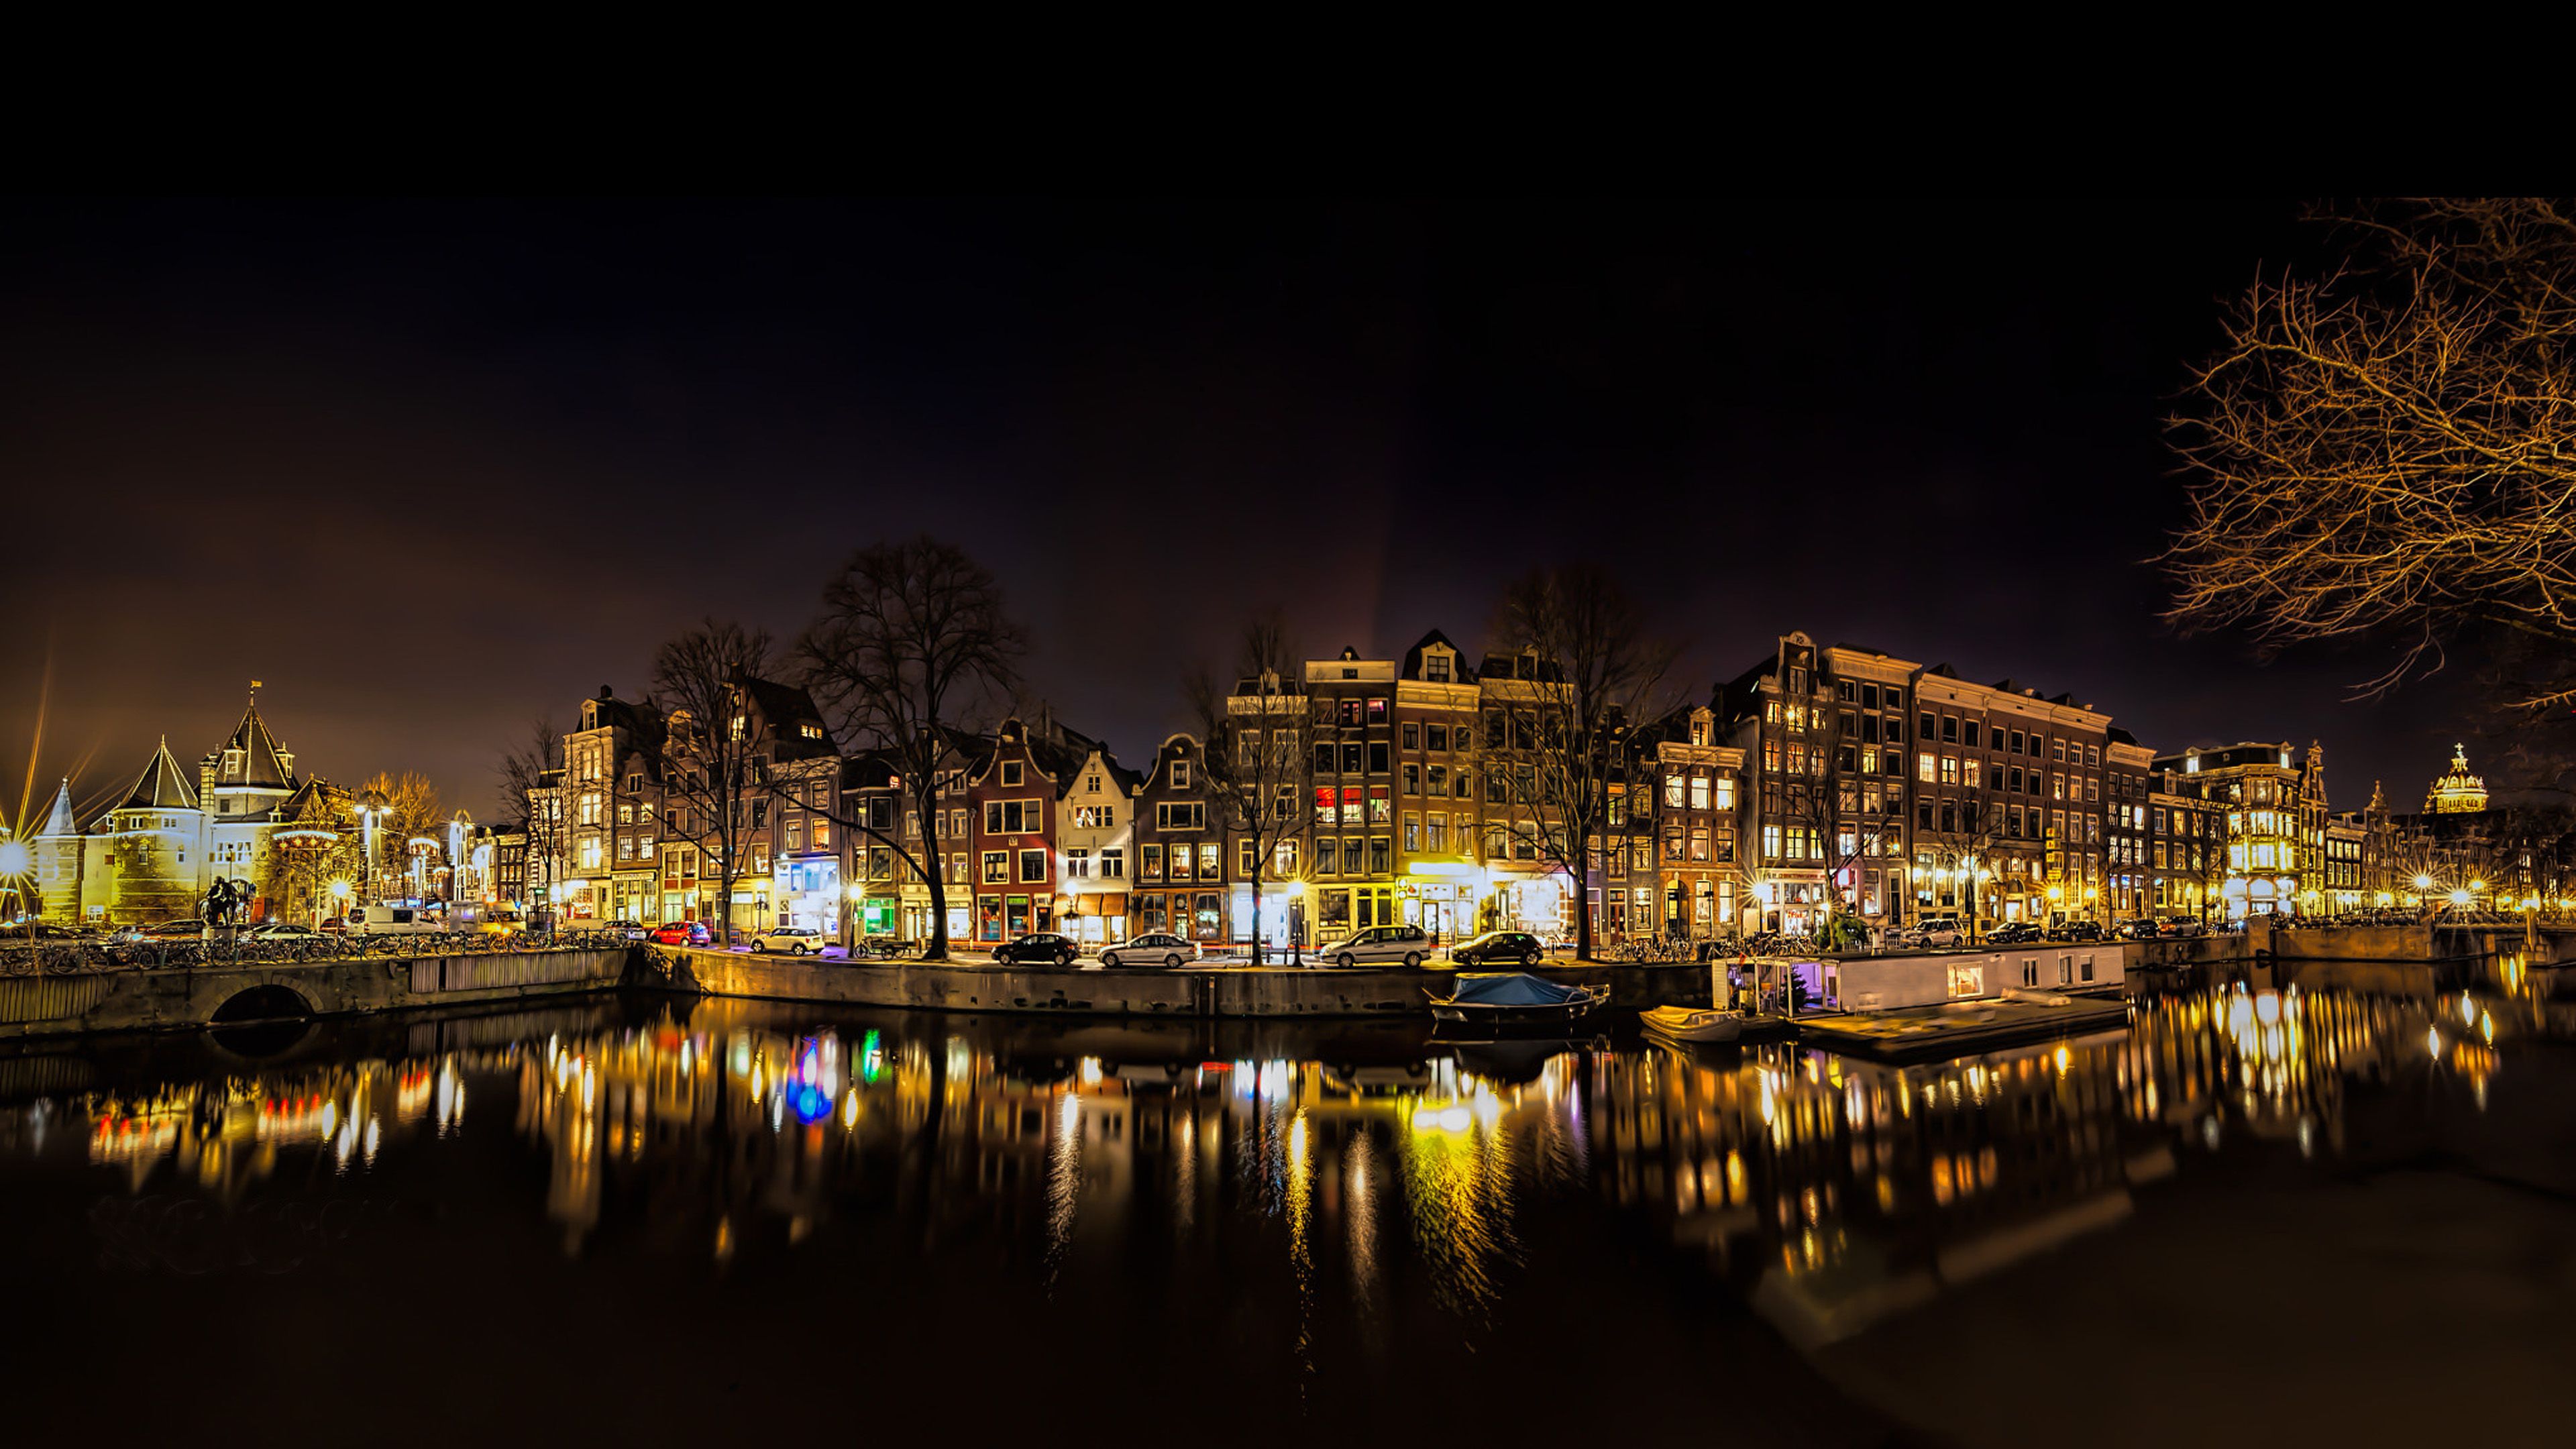 Amsterdam Canal Night Time Amstel River In The Netherlands Europe 4k Ultra HD Desktop Wallpaper For Computers Laptop Tablet, Wallpaper13.com